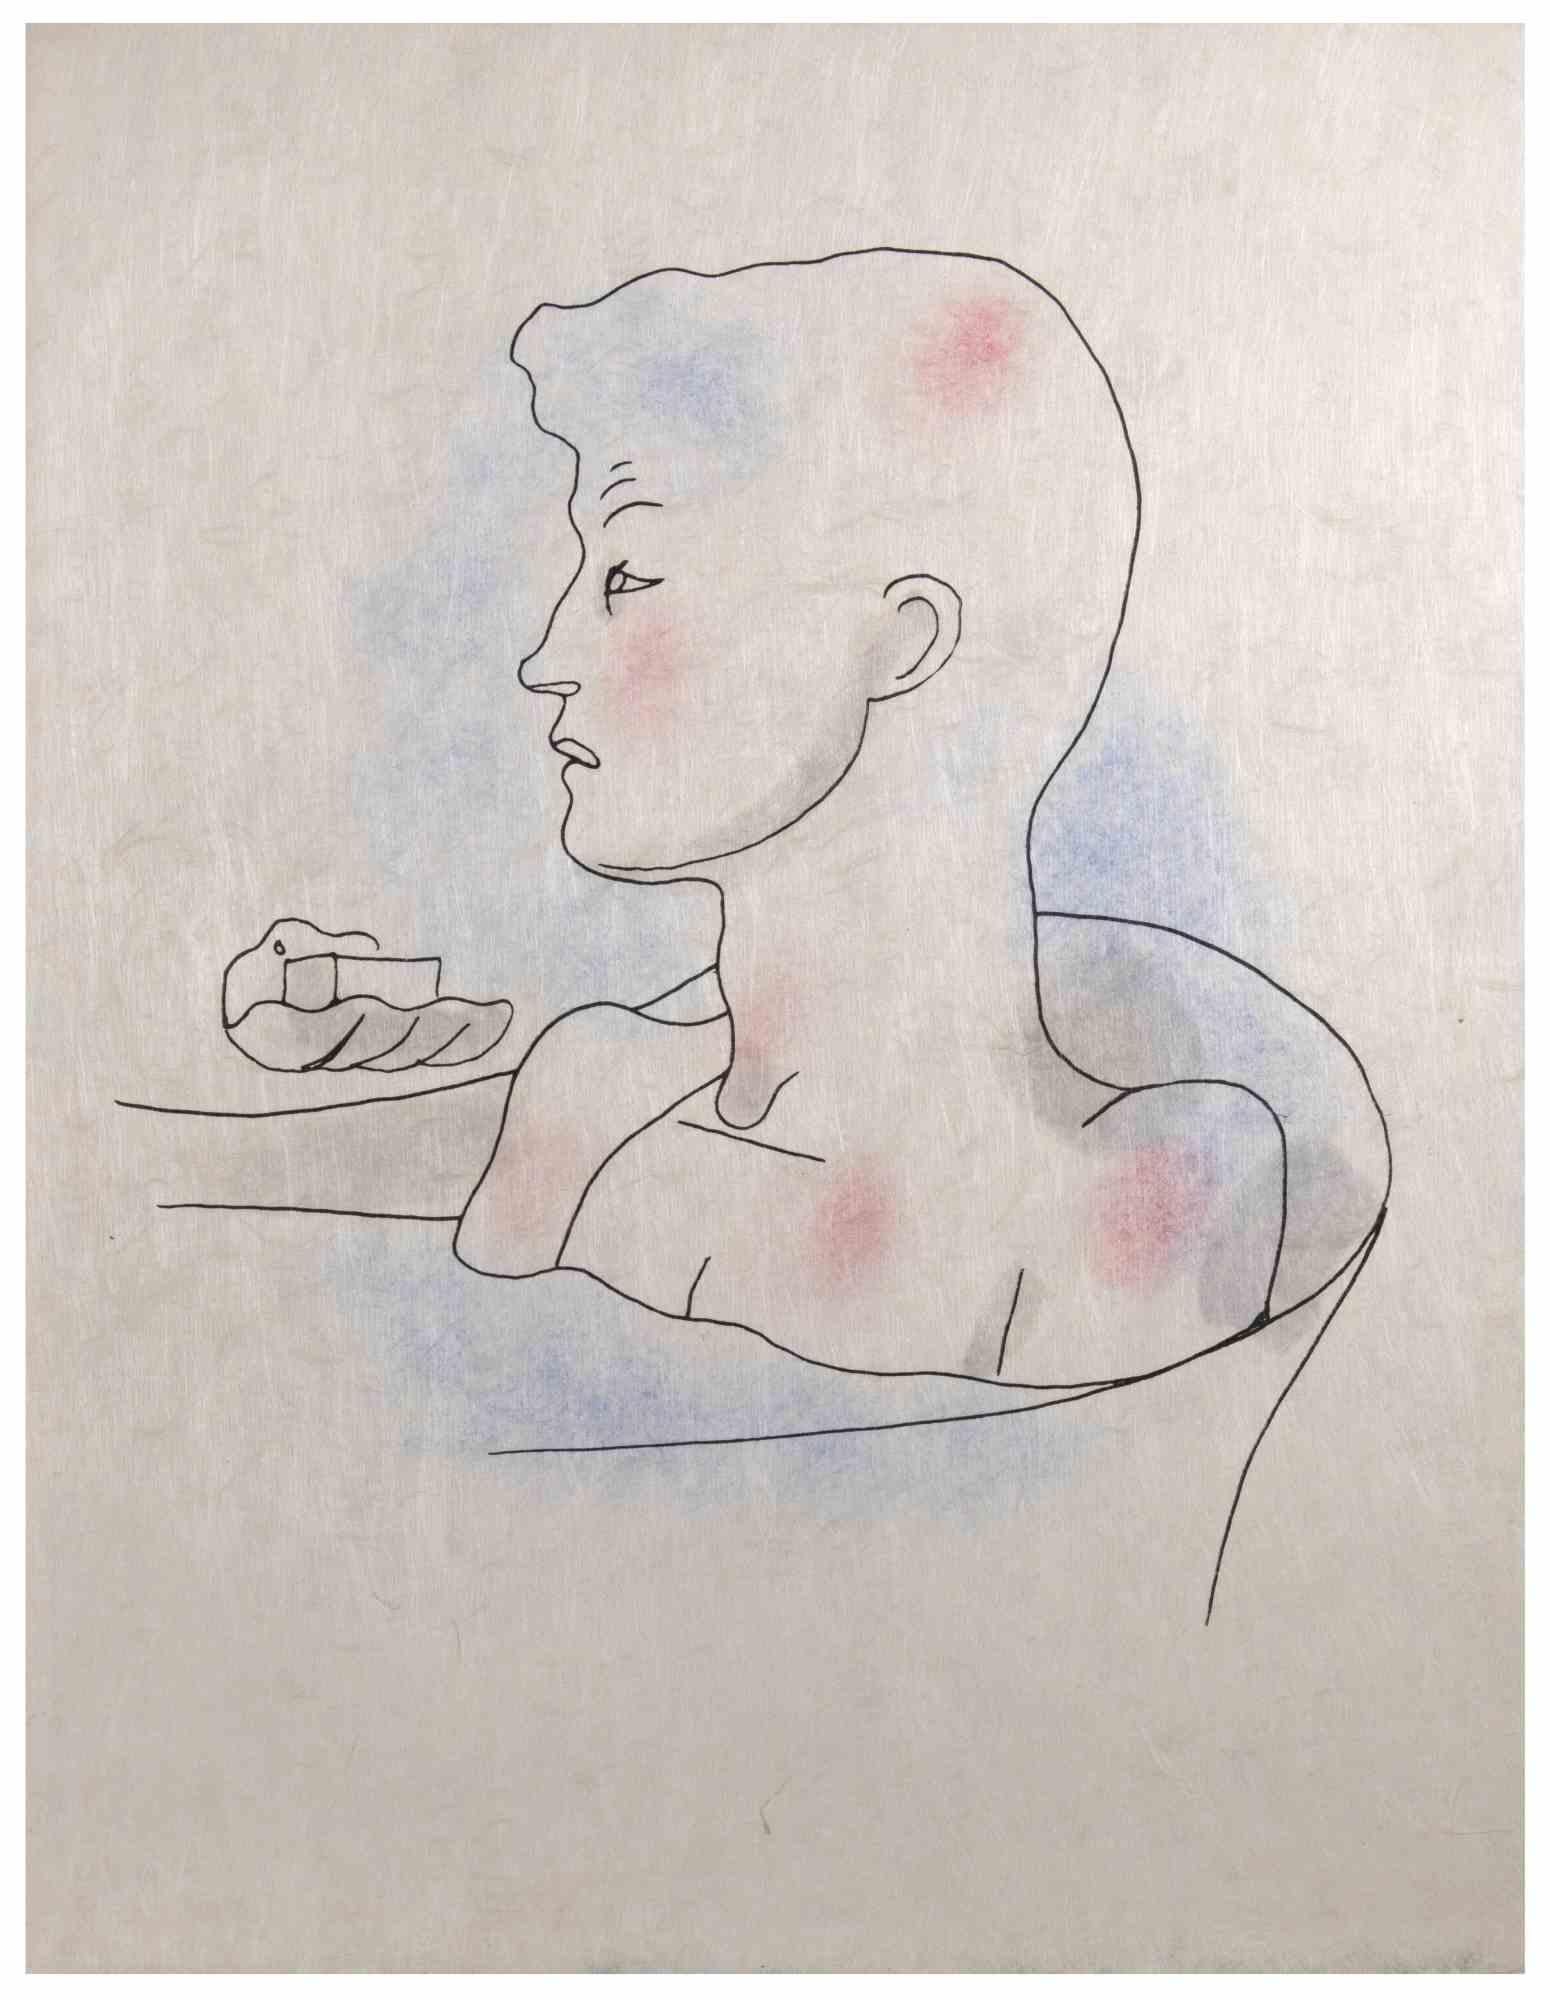 To The Bathroom is a Colored lithograph realized on japan paper by  Jean Cocteau (1889 -1963) in 1930 ca. 

French draftsman, poet, essayist, playwright, librettist, film director.

Excellent condition, no signature.

The artwork represents a young